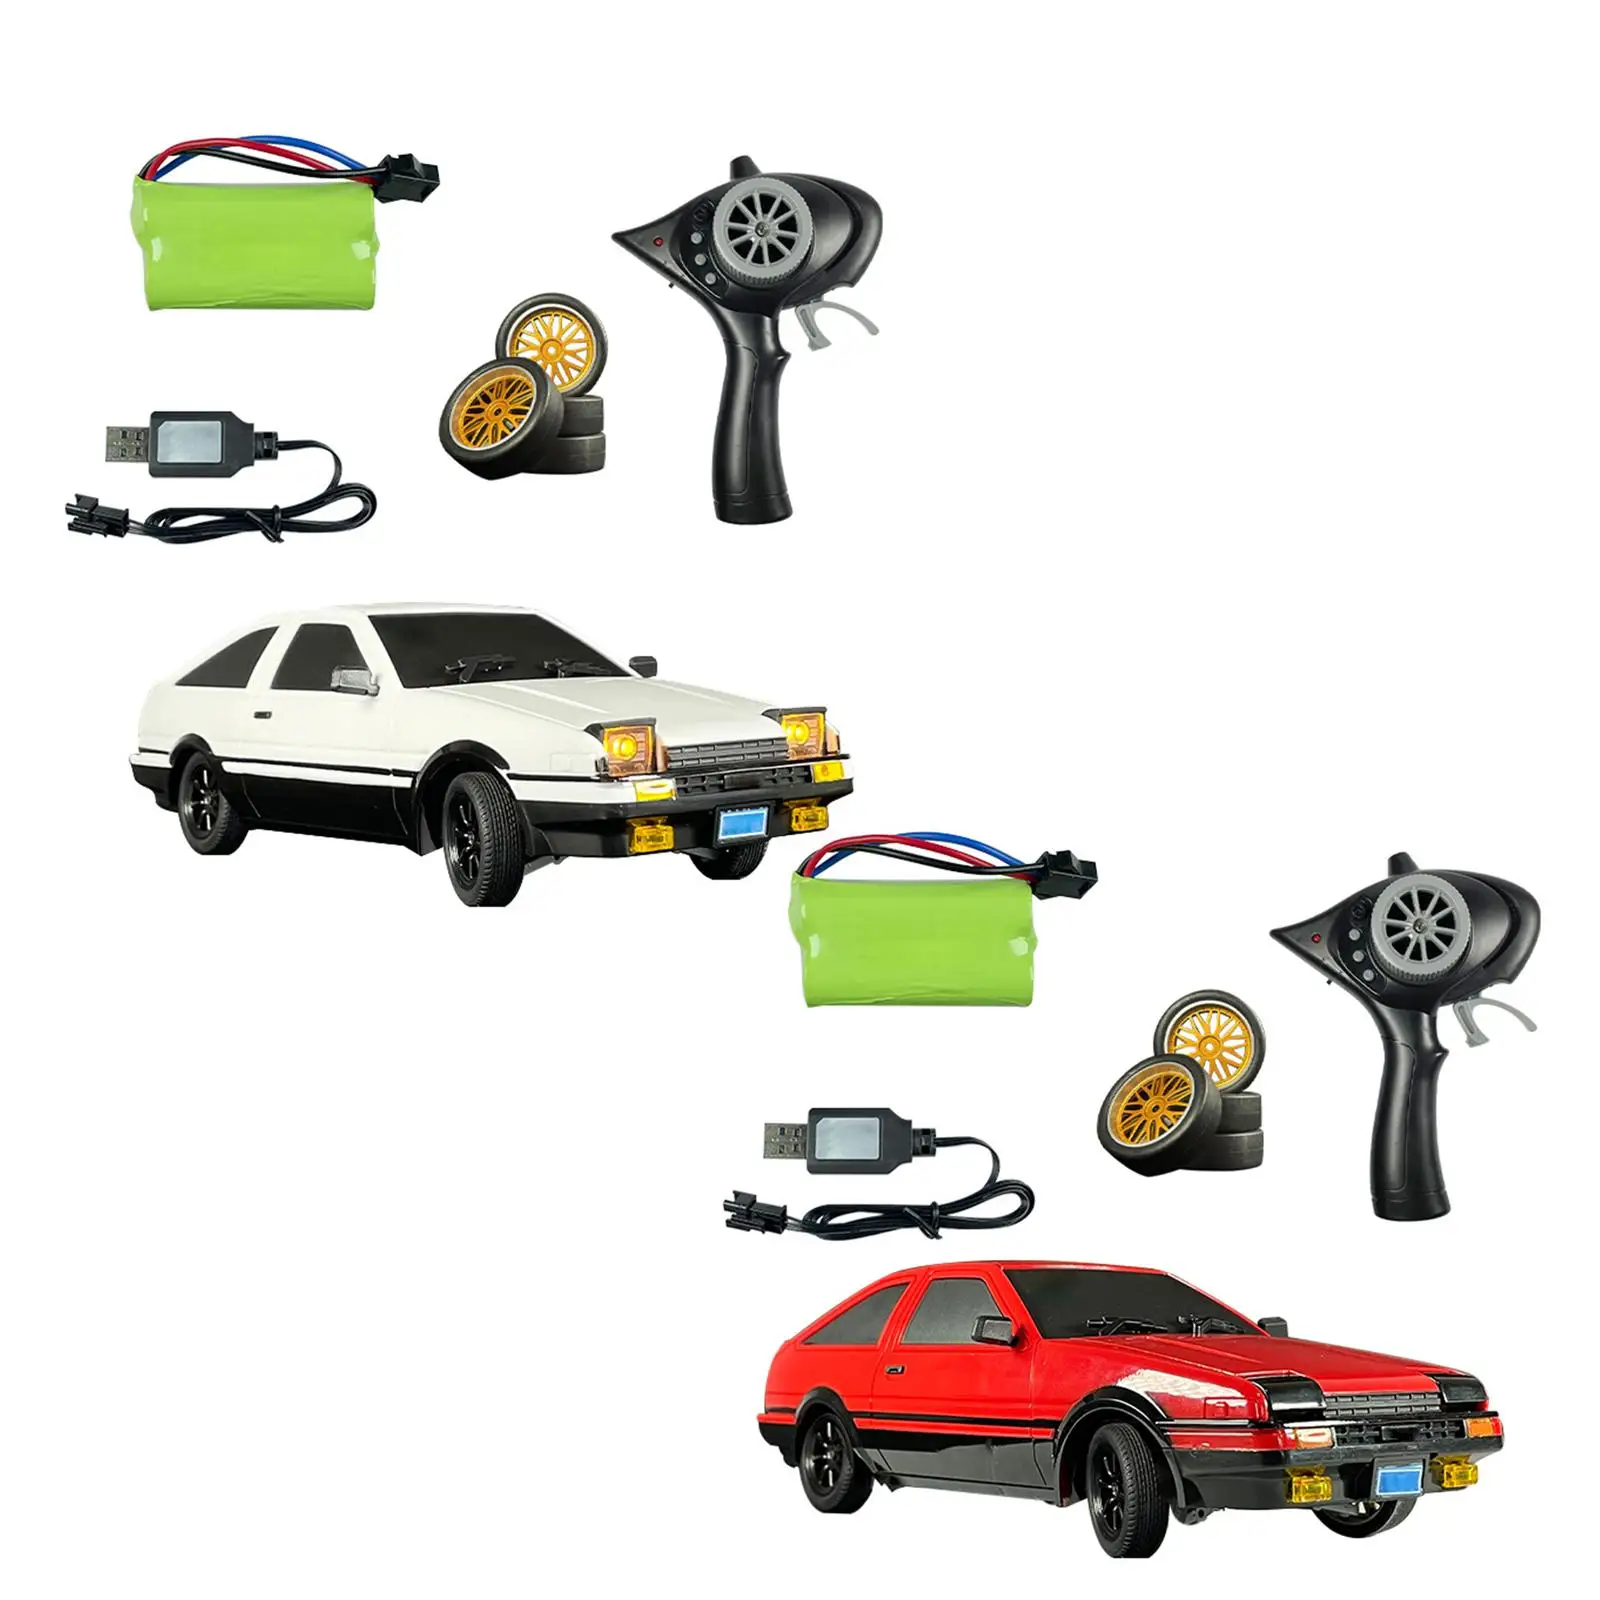 1:18 Scale Electric 3WD Remote Control Flip for Ld1801 Adults Children